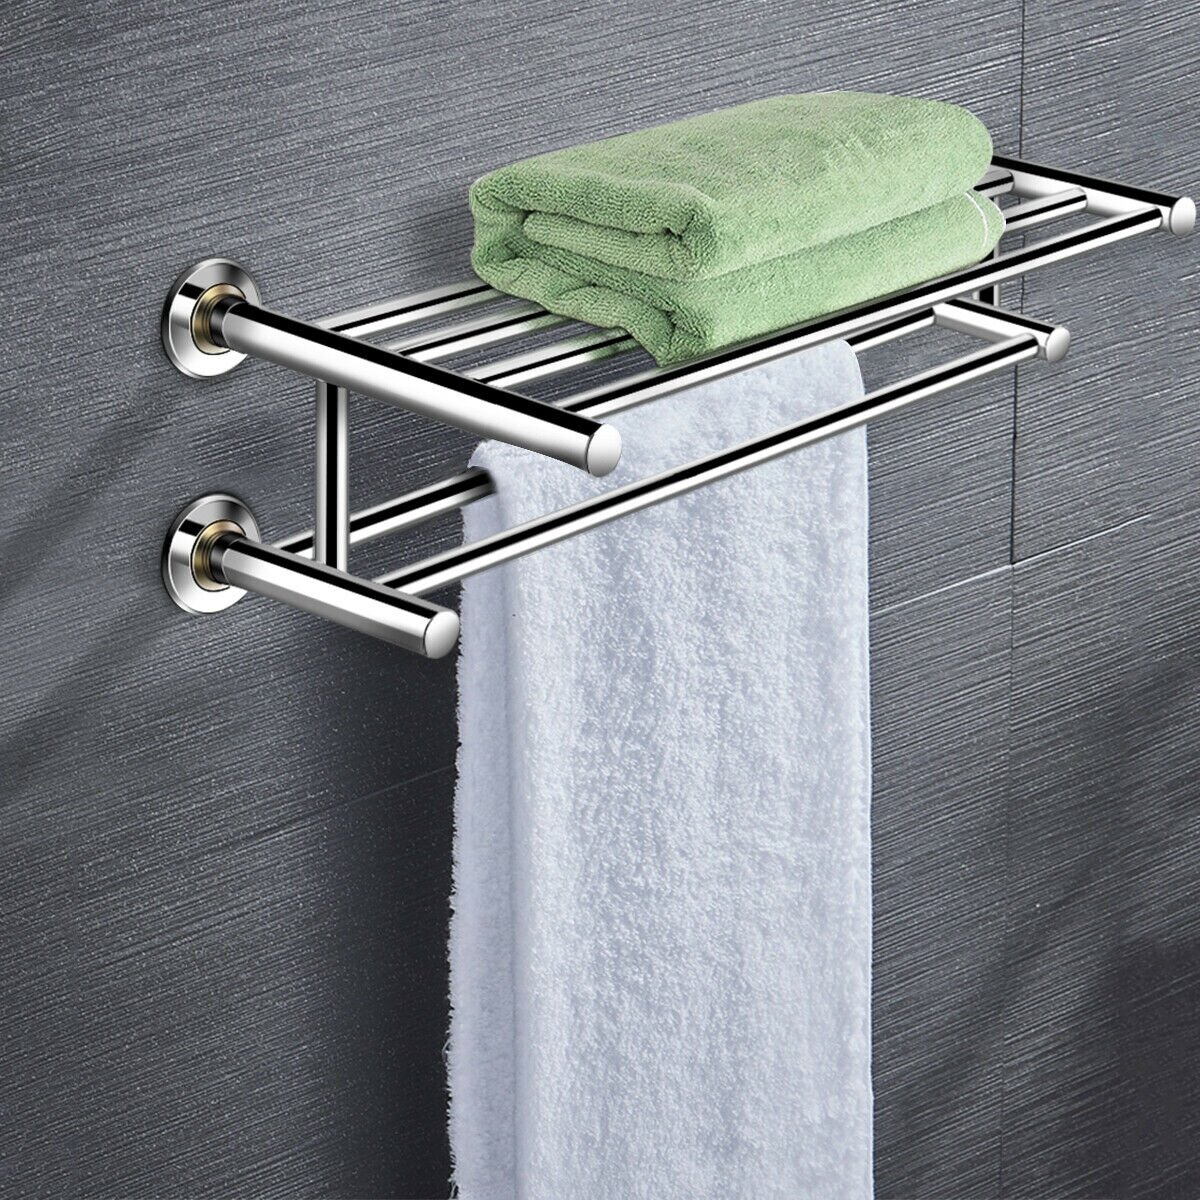 Wall-Mounted Towel Rack with Shelf Bathroom Towel Rack Stainless Steel Hanging Ring Towel Ring Household Ring Single Layer Hand Towel 